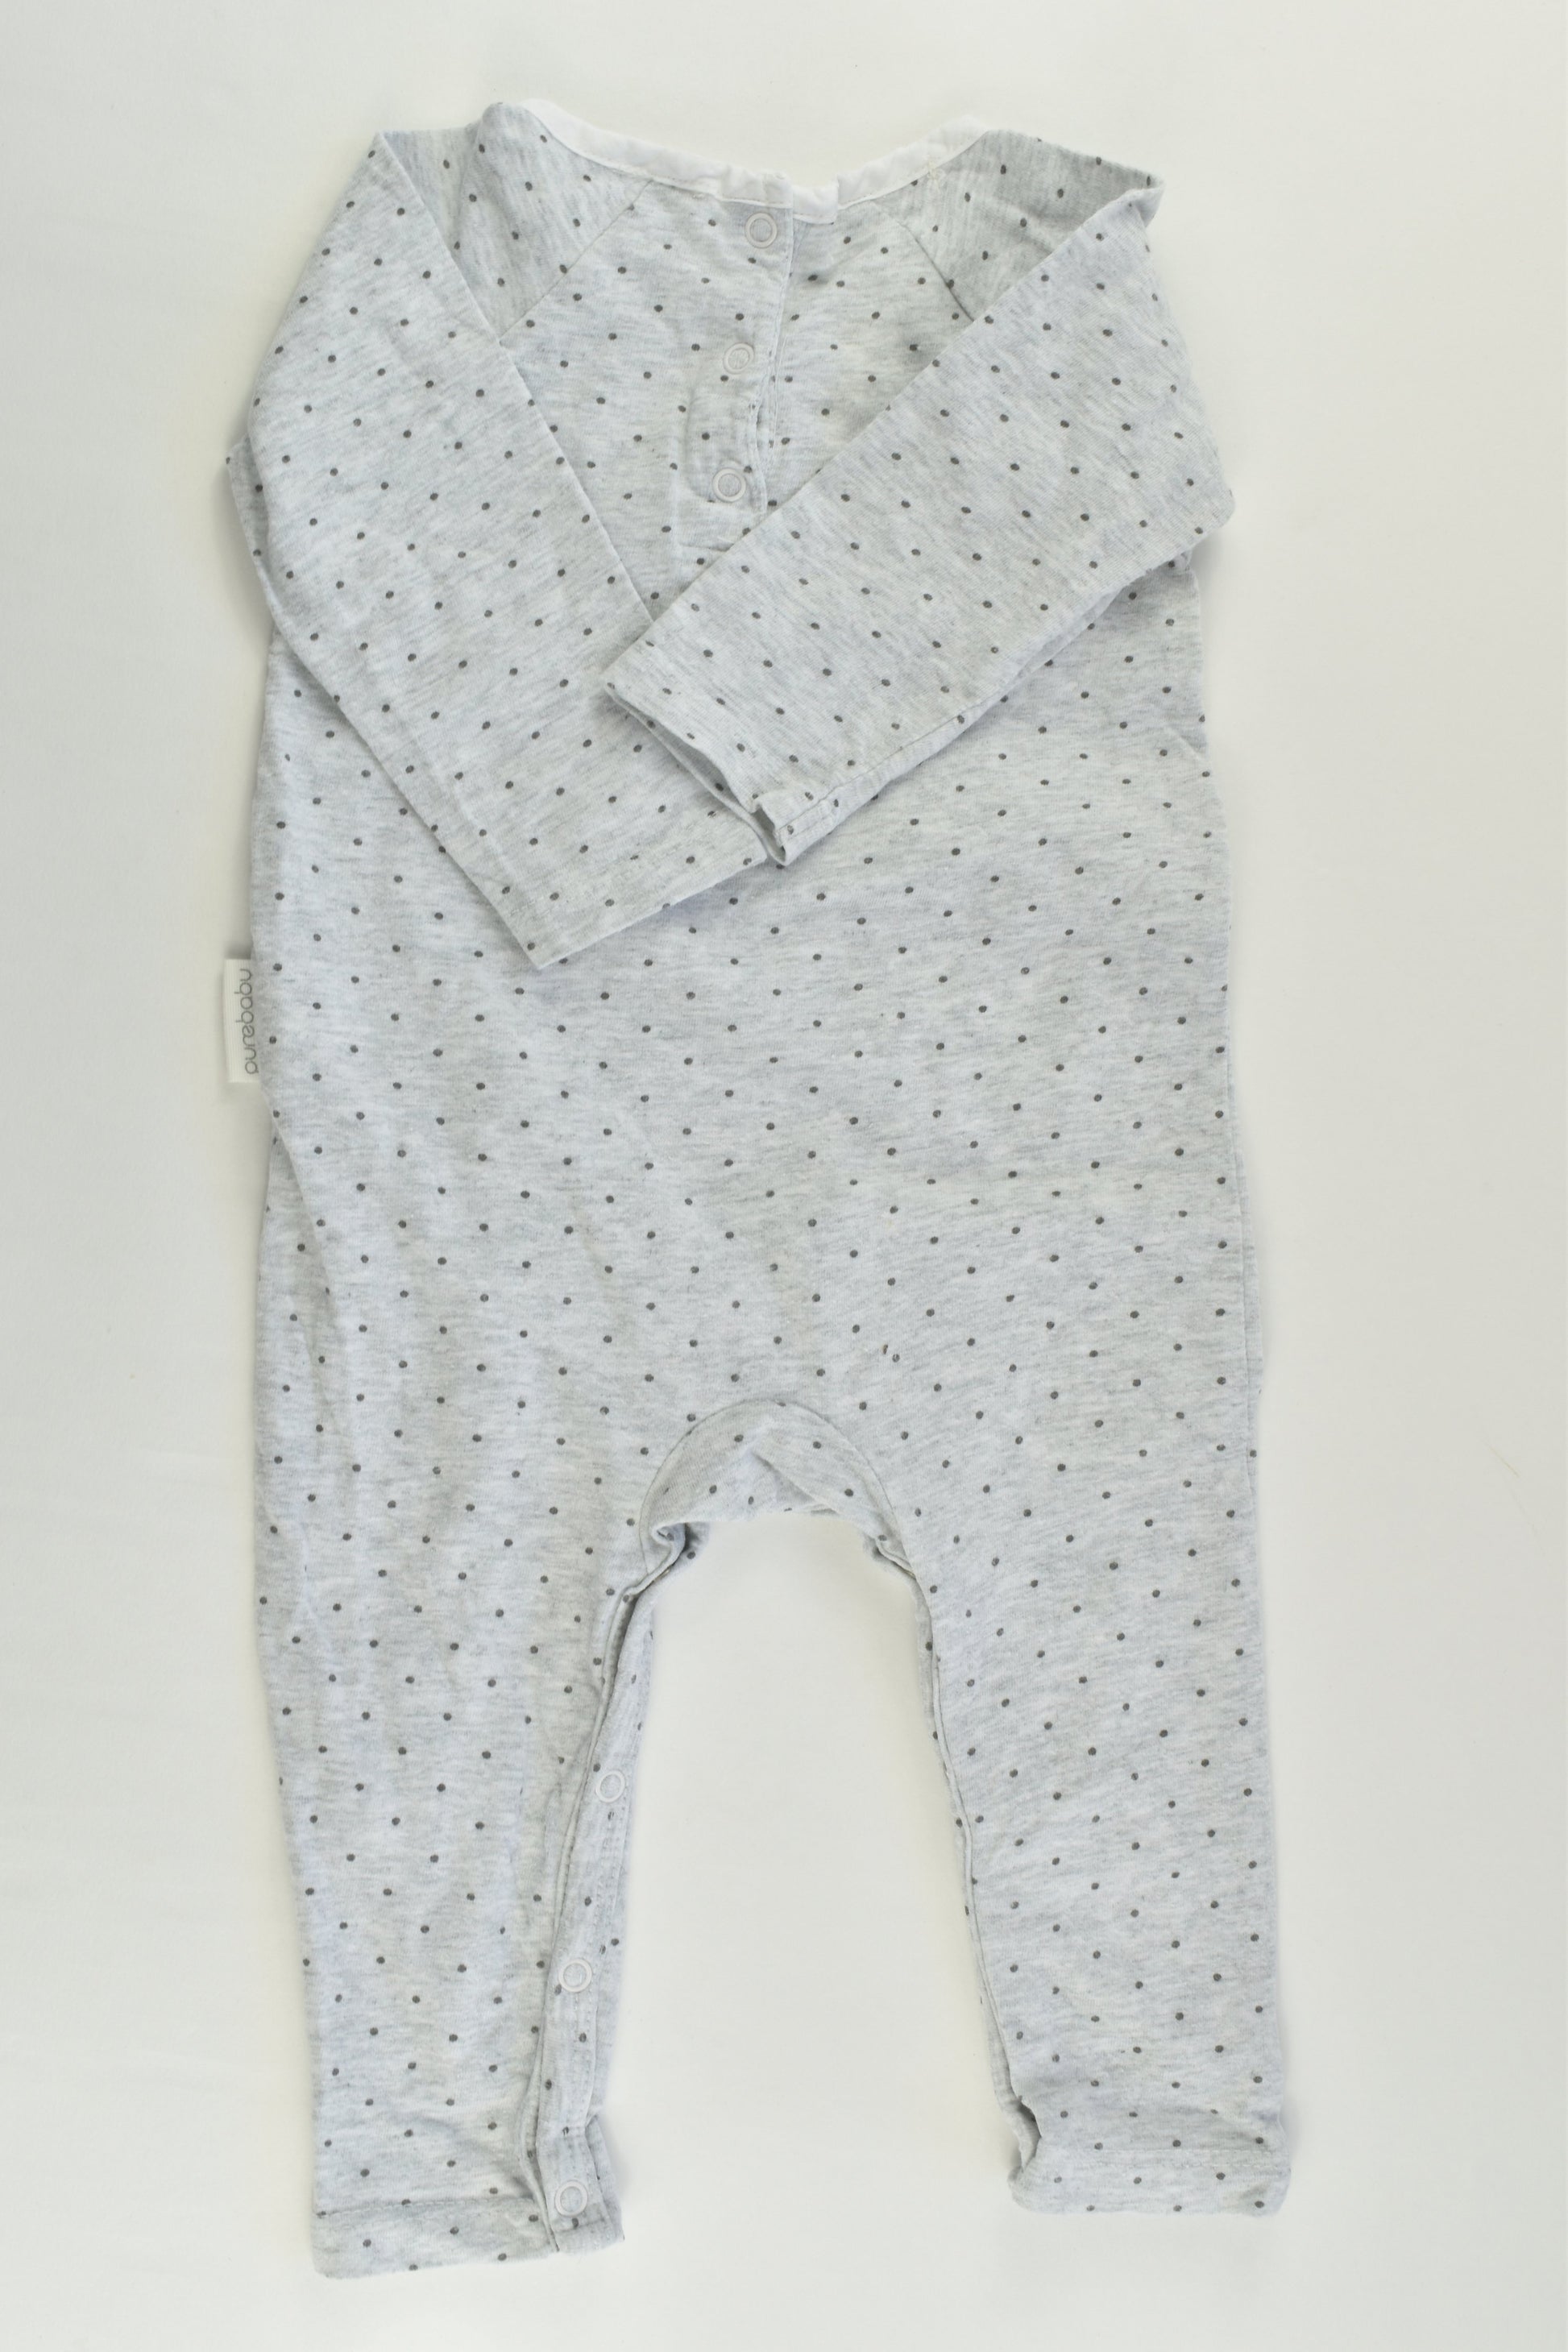 Purebaby Size 00 (3-6 months) Floral Embroidery Romper